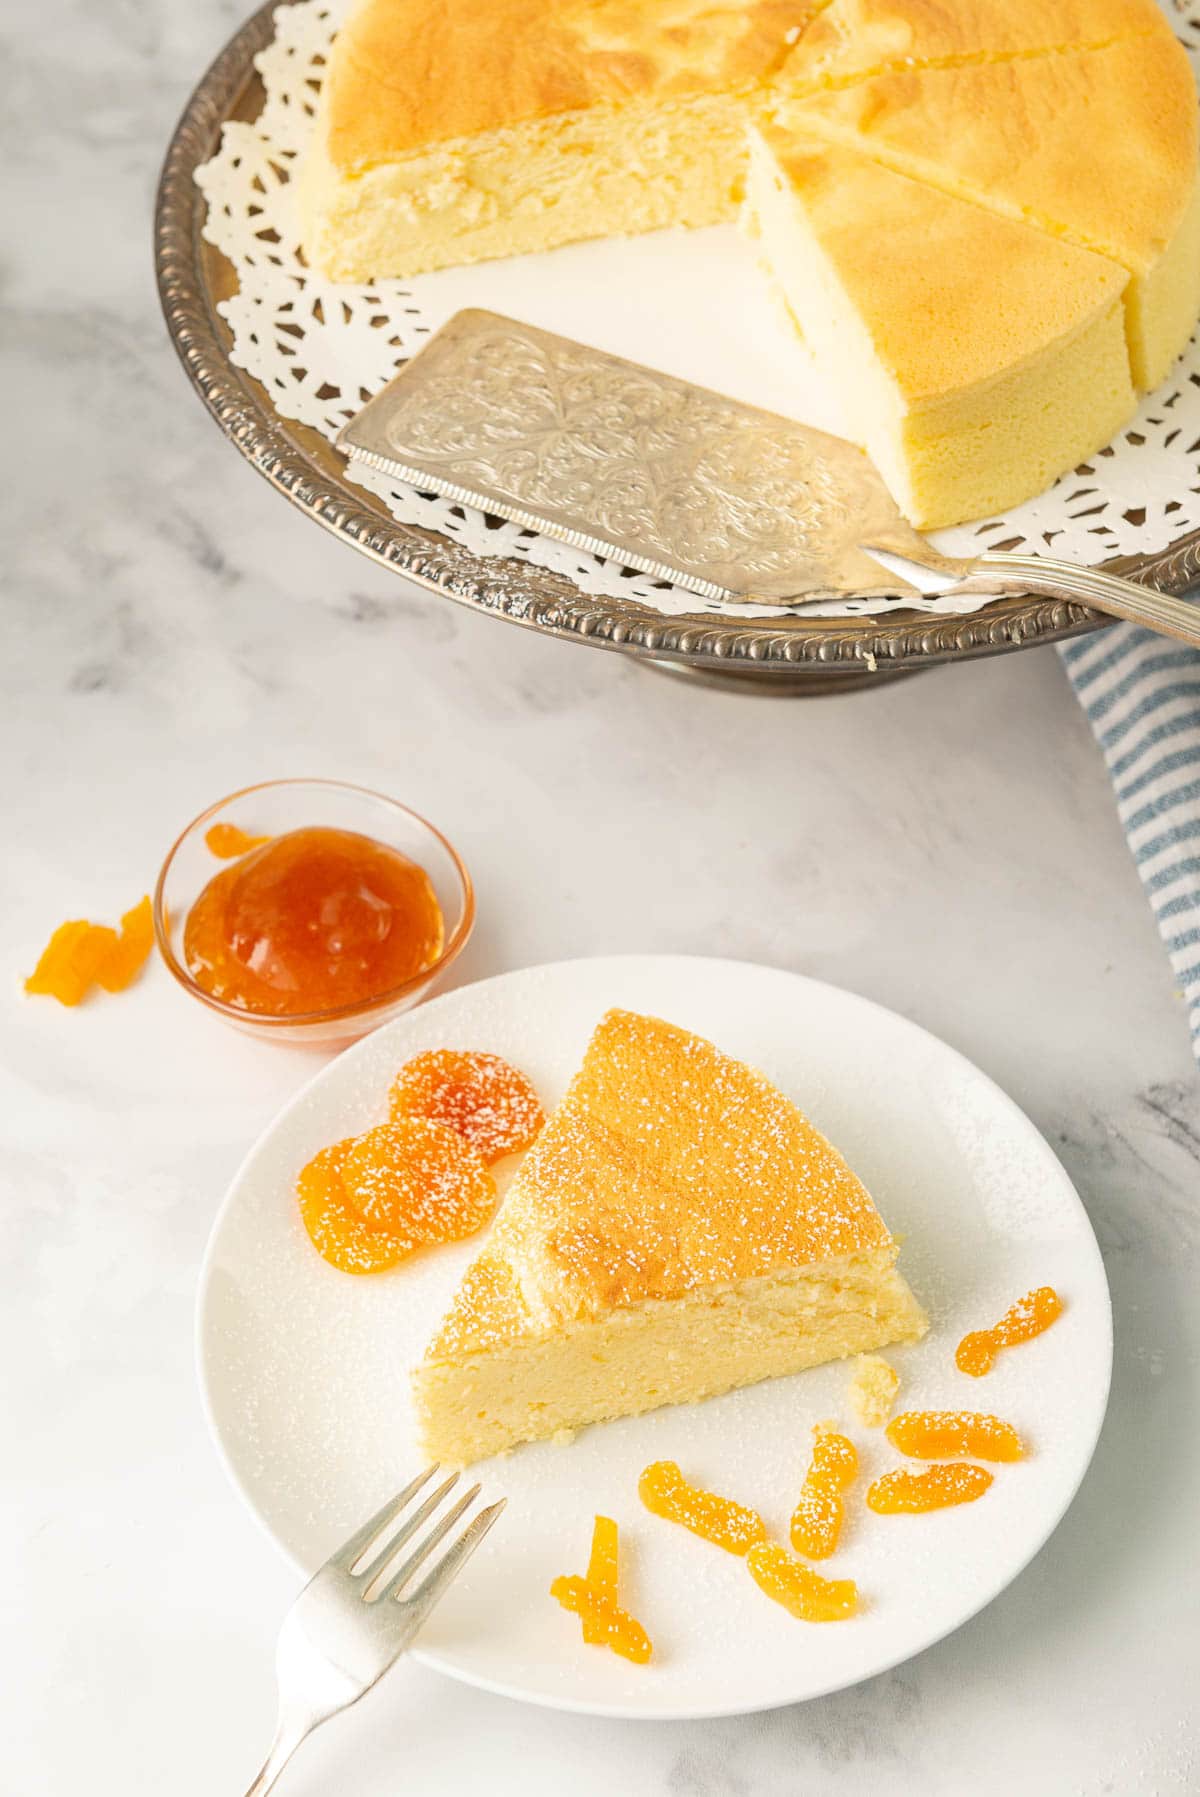 A slice of Japanese cheesecake on a plate, decorated with a little icing sugar, and some pieces of apricot to its side.